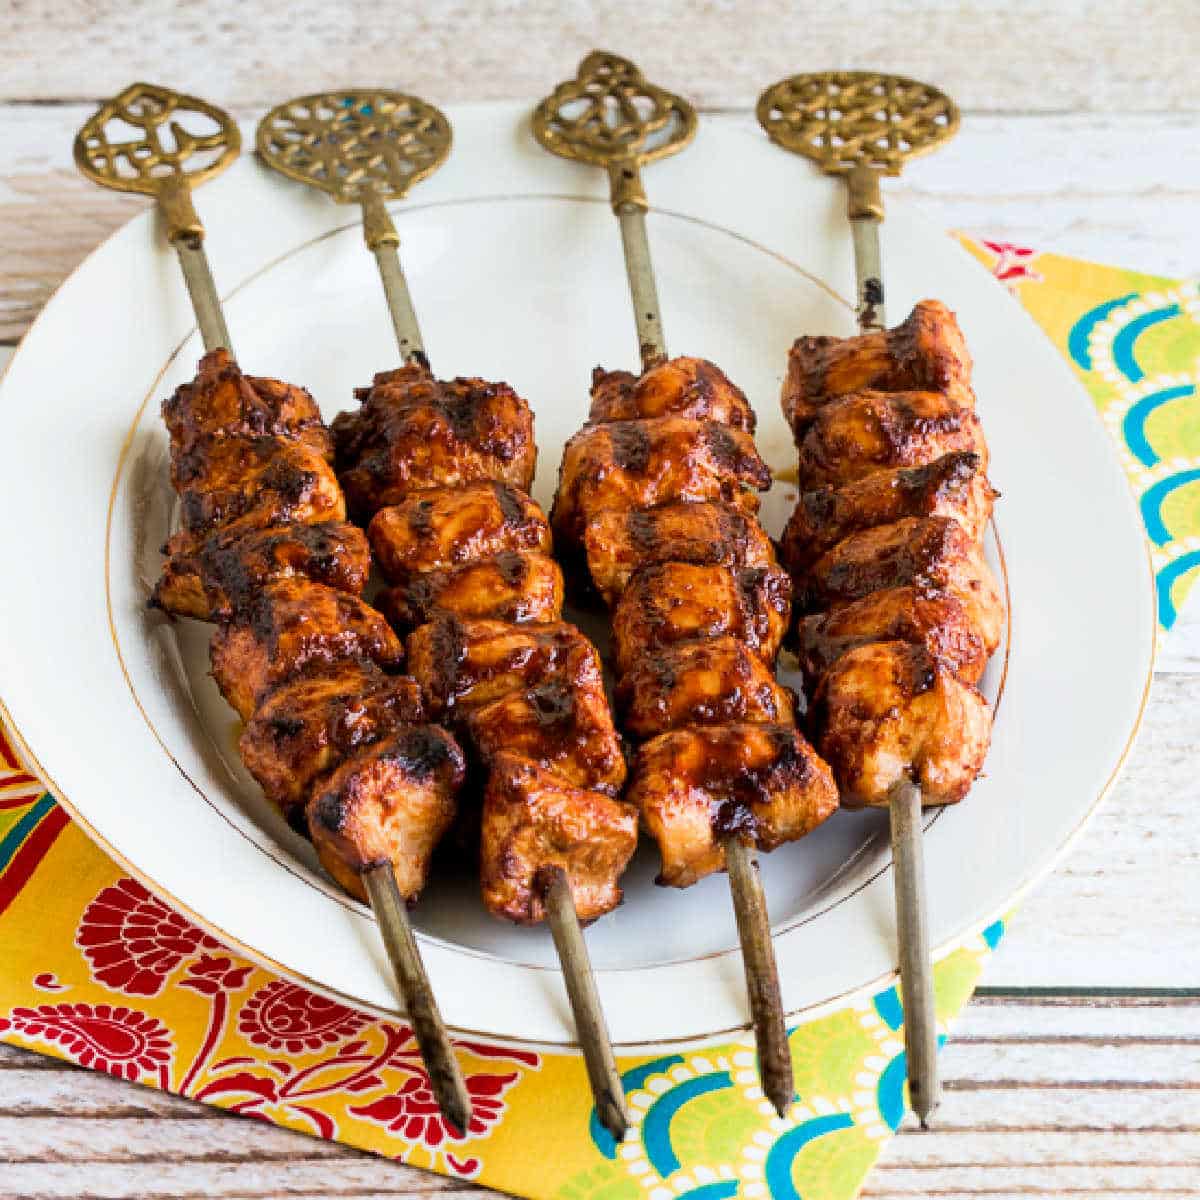 Grilled Sriracha Chicken Kabobs with four kabobs shown on serving plate.